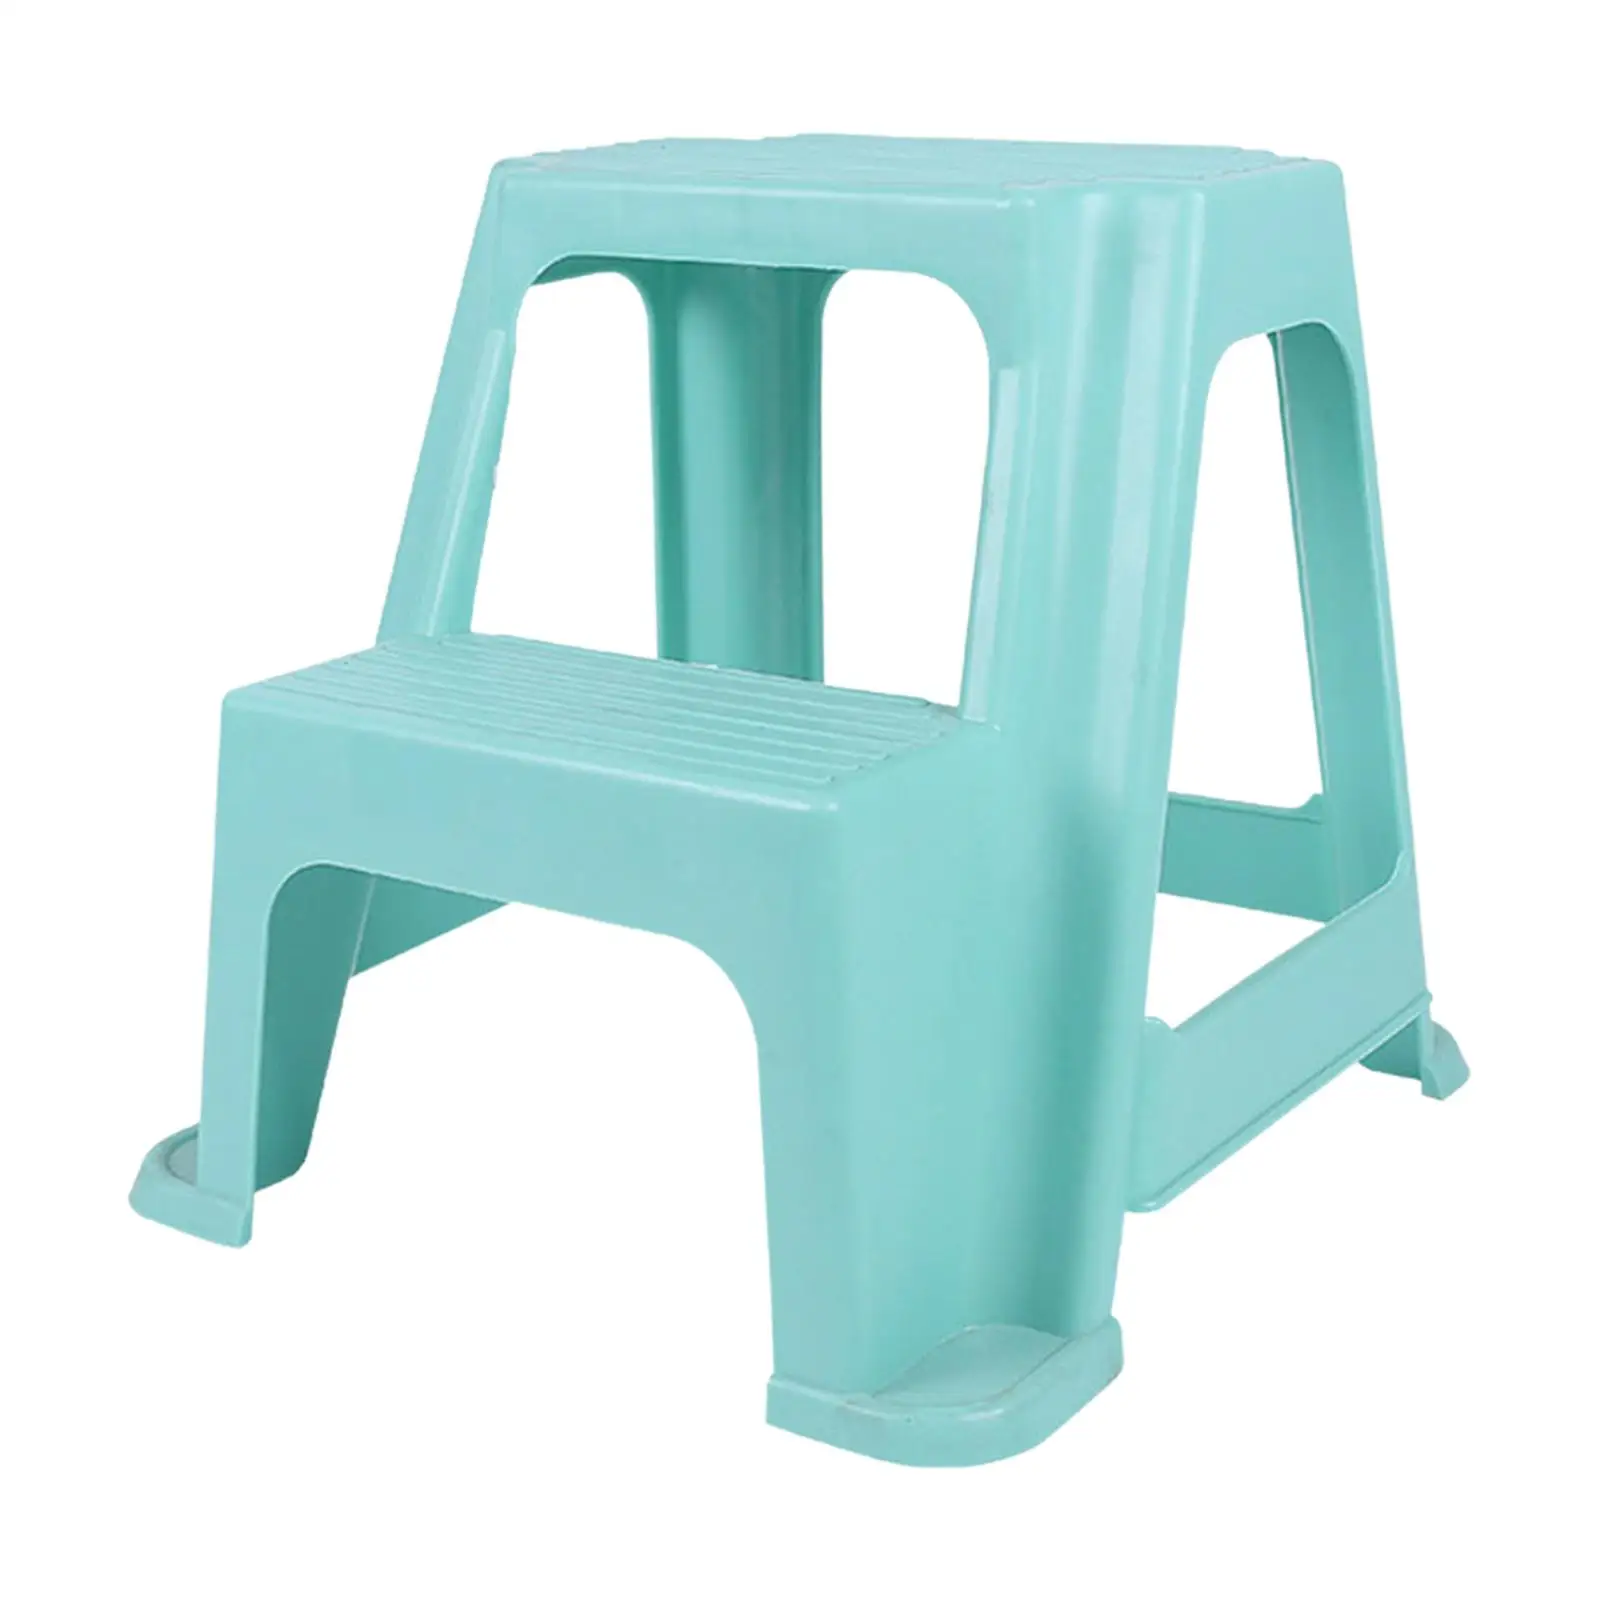 2 Step Stool Lightweight Toilet Stool Footstool Bedside Step Stool Two Step Stool for Kids Toddlers Seniors Dogs Kitchen